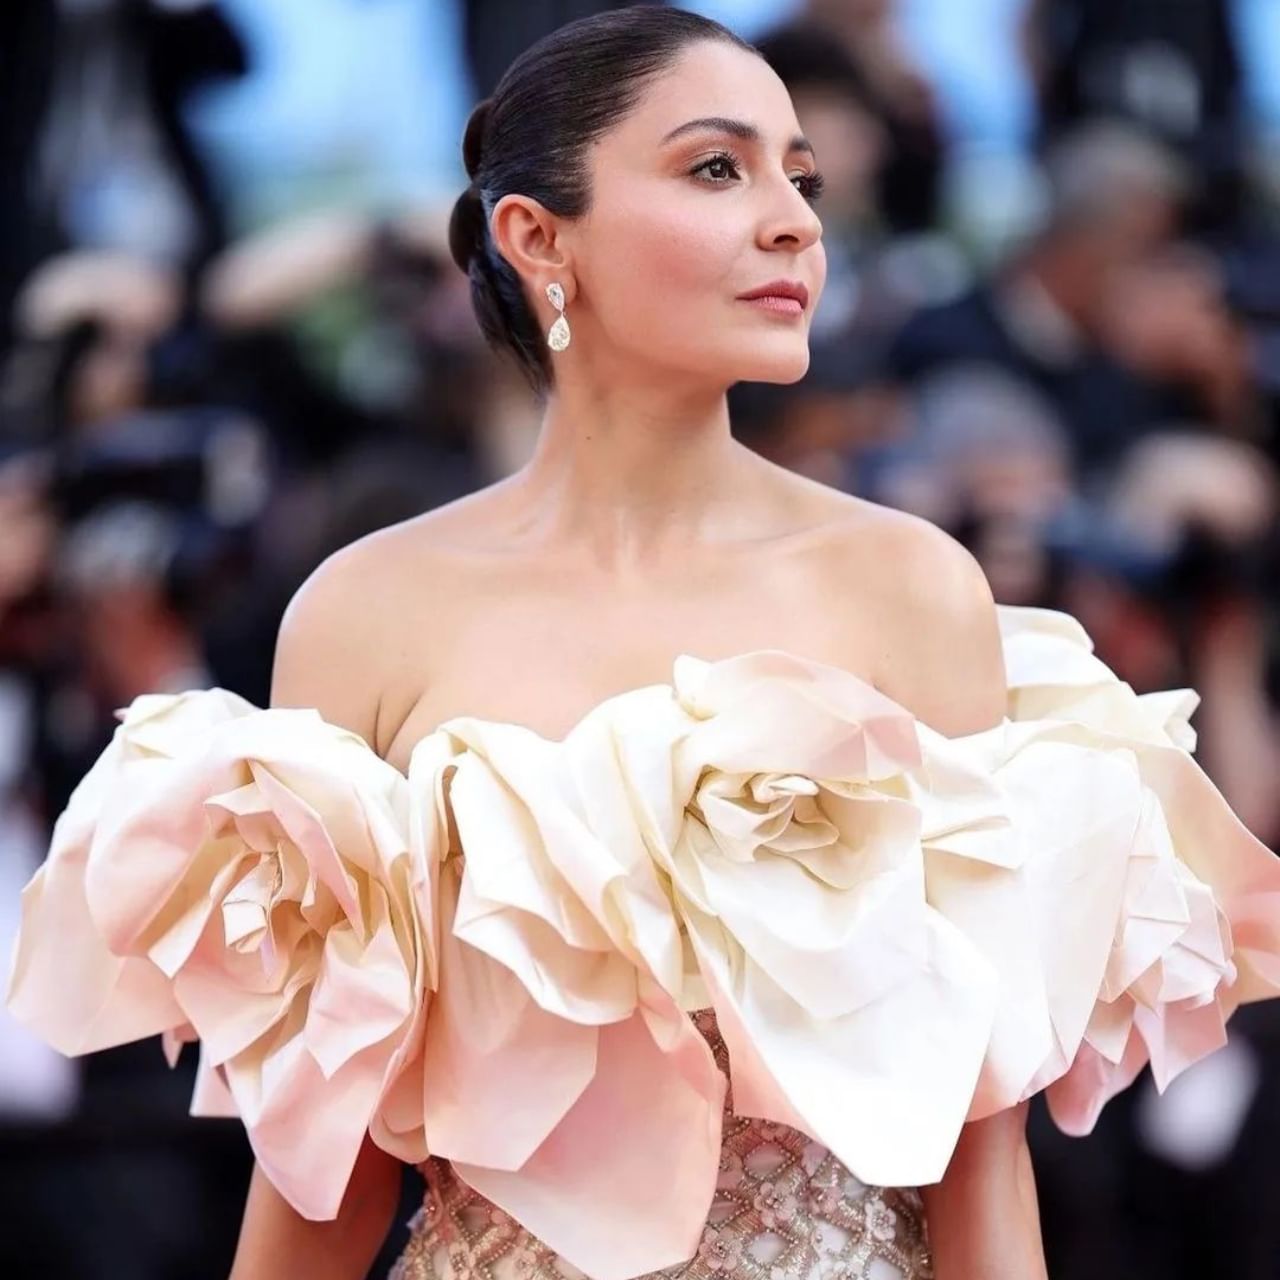 Anushka Sharma is looking very beautiful in the photos.  Anushka Sharma's look in ivory off shoulder white gown is worth seeing.  From above, her sweet smile is seen enhancing her look.  Anushka flaunted her fashion sense on the red carpet.  (Photo credit- @instagram)